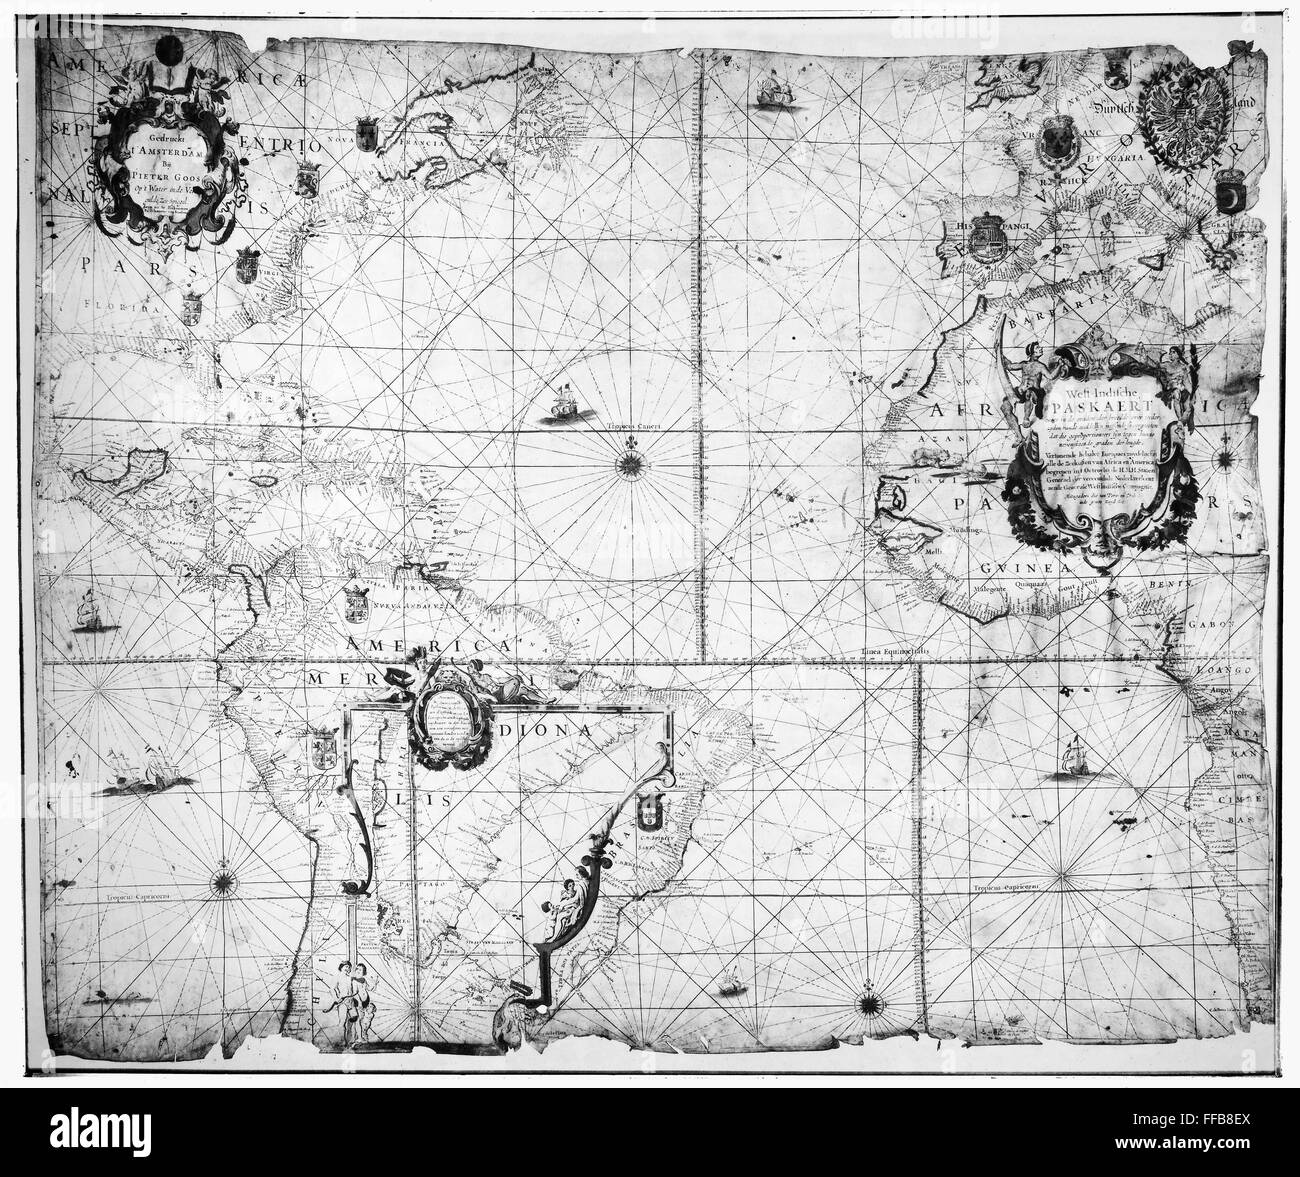 SECOND PASKAERT MAP, 1621. /nThis map was first issued shortly after the incorporation, in 1621, of the Dutch West India Company, whose possessions it portrayed. Stock Photo